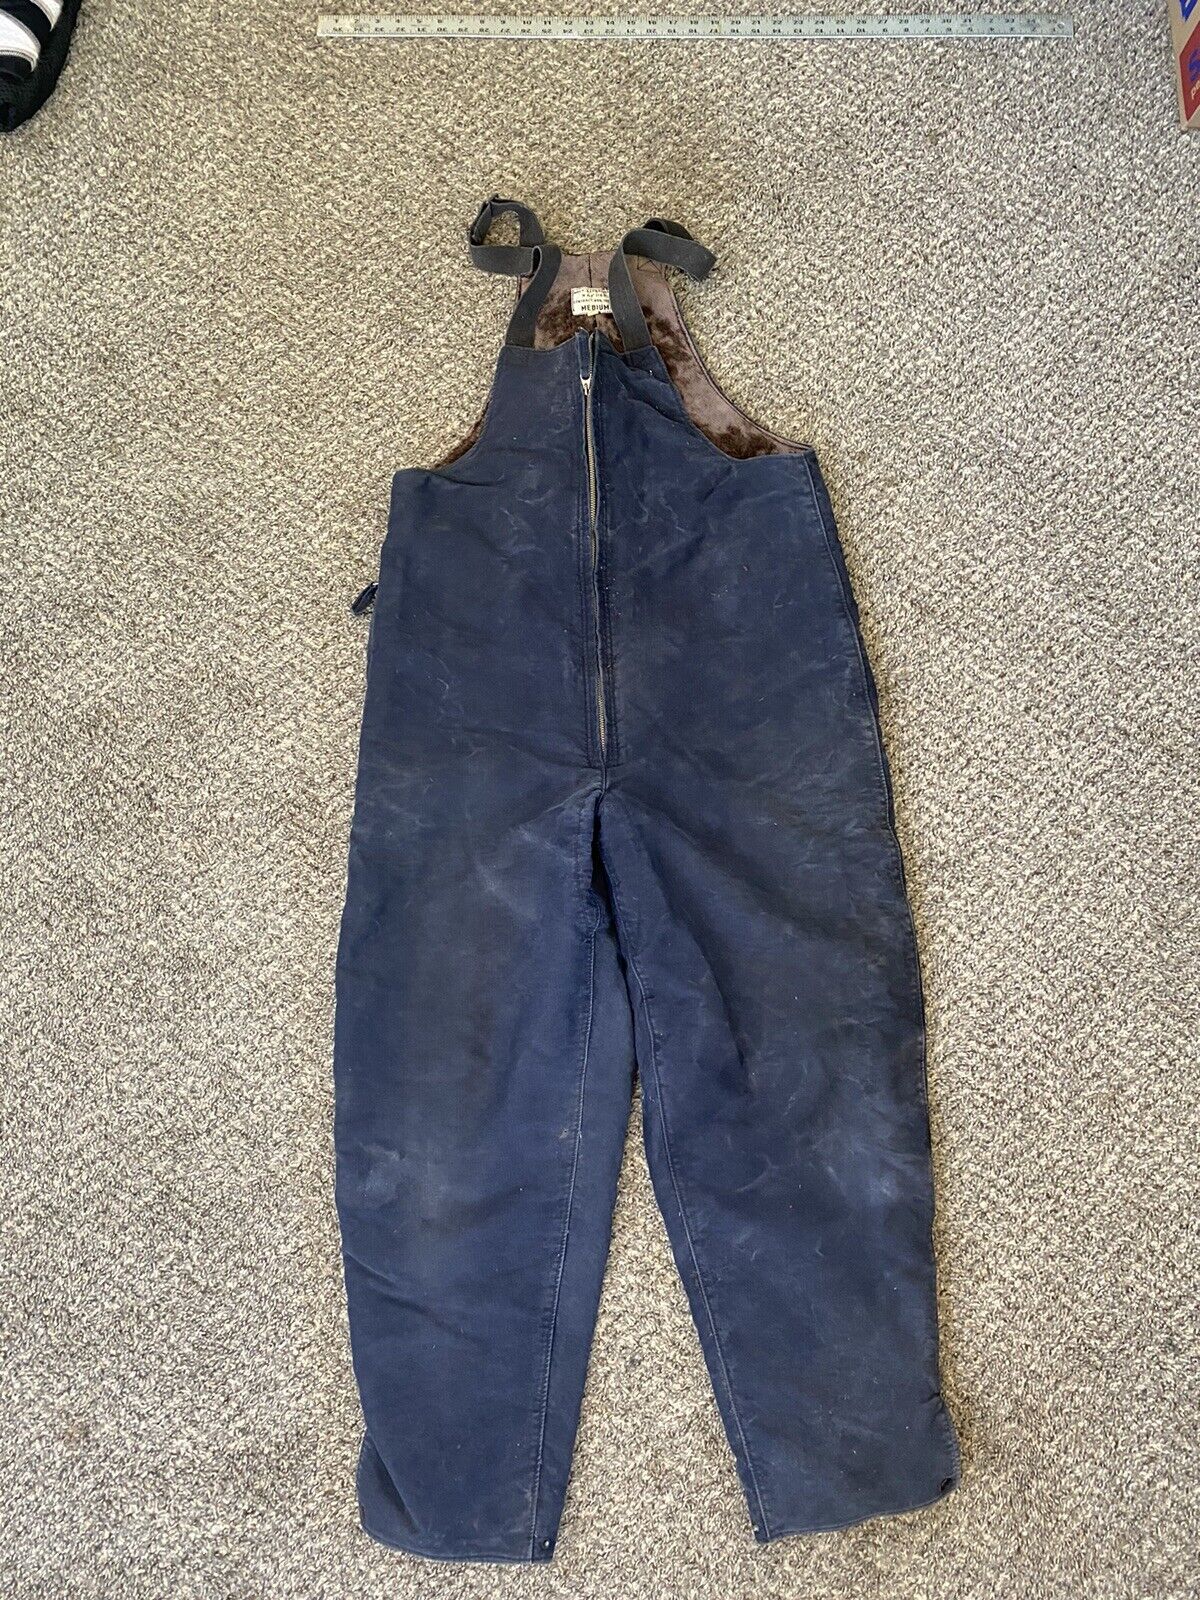 WWII US Navy Fur Lined Blue Deck Overalls Medium Contract 10204